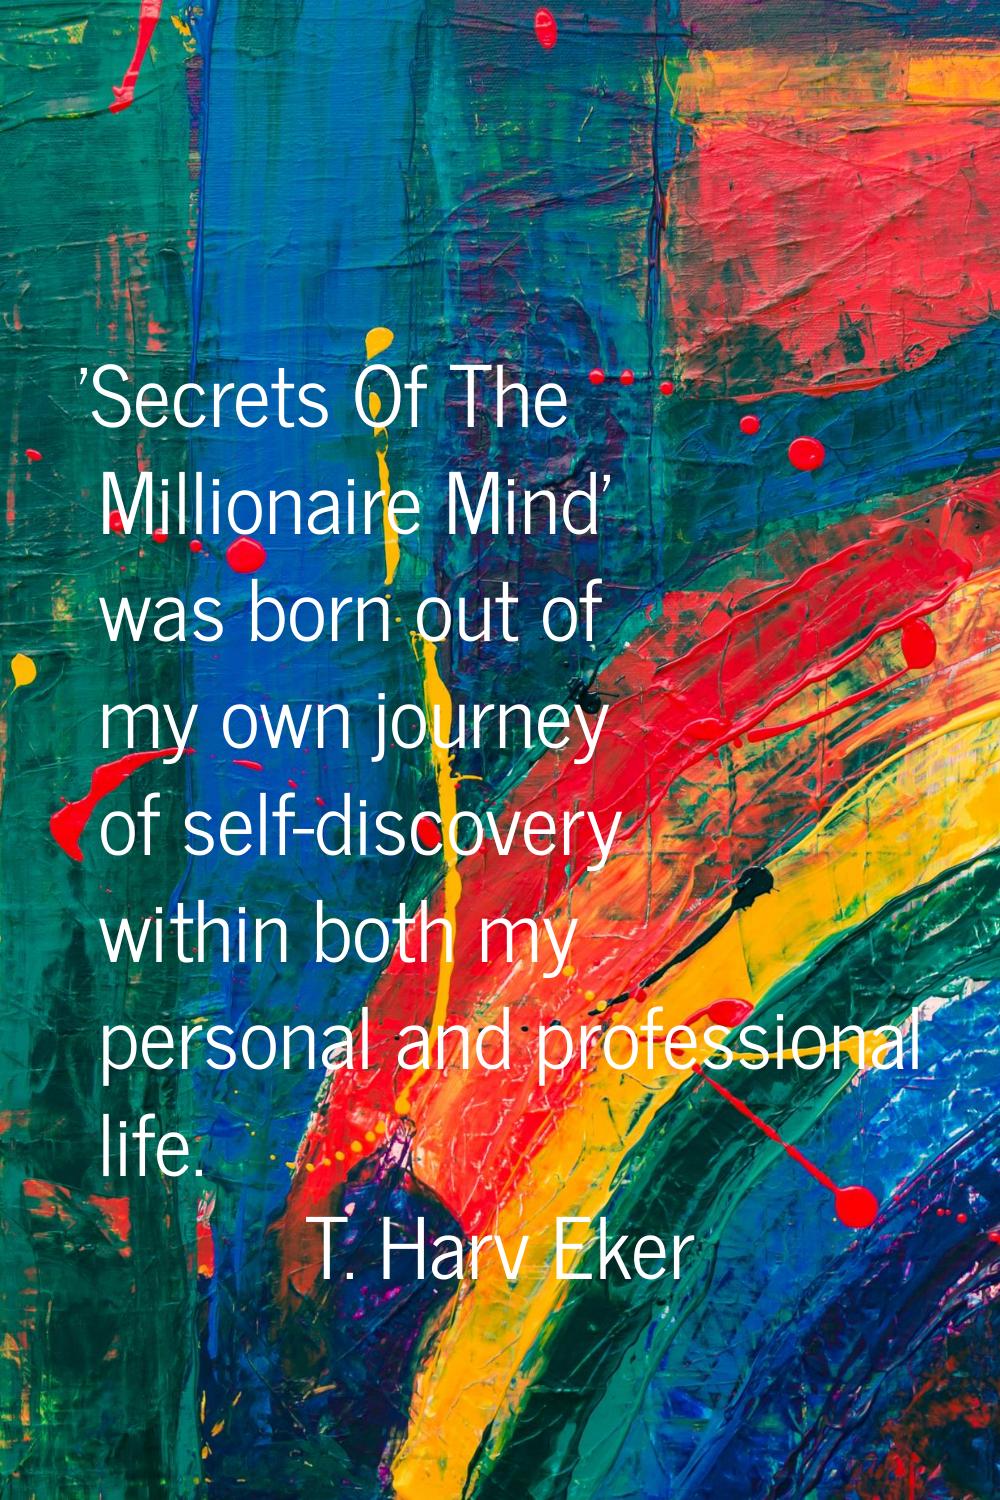 'Secrets Of The Millionaire Mind' was born out of my own journey of self-discovery within both my p